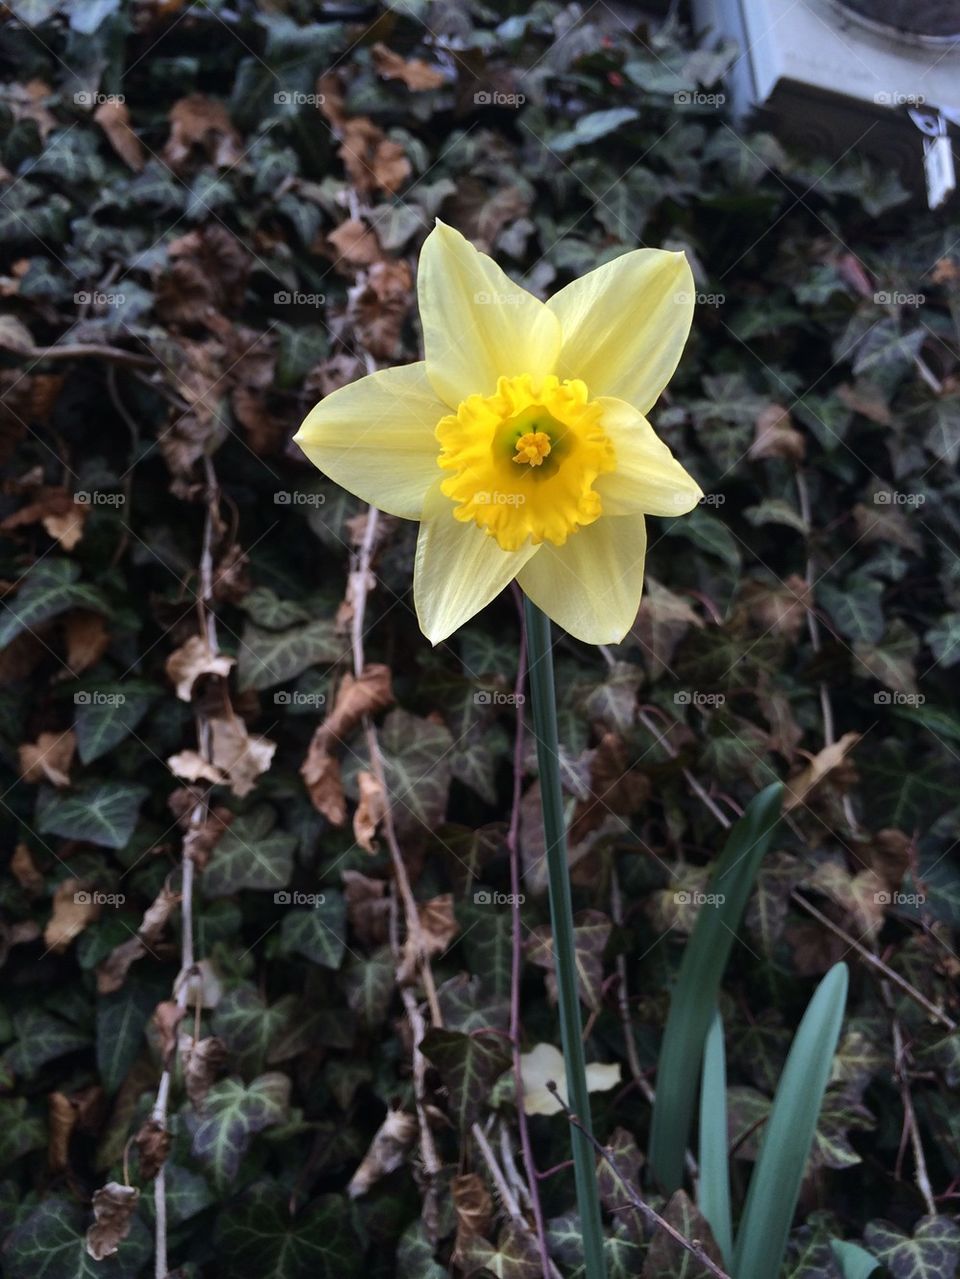 One Lovely Daffodil